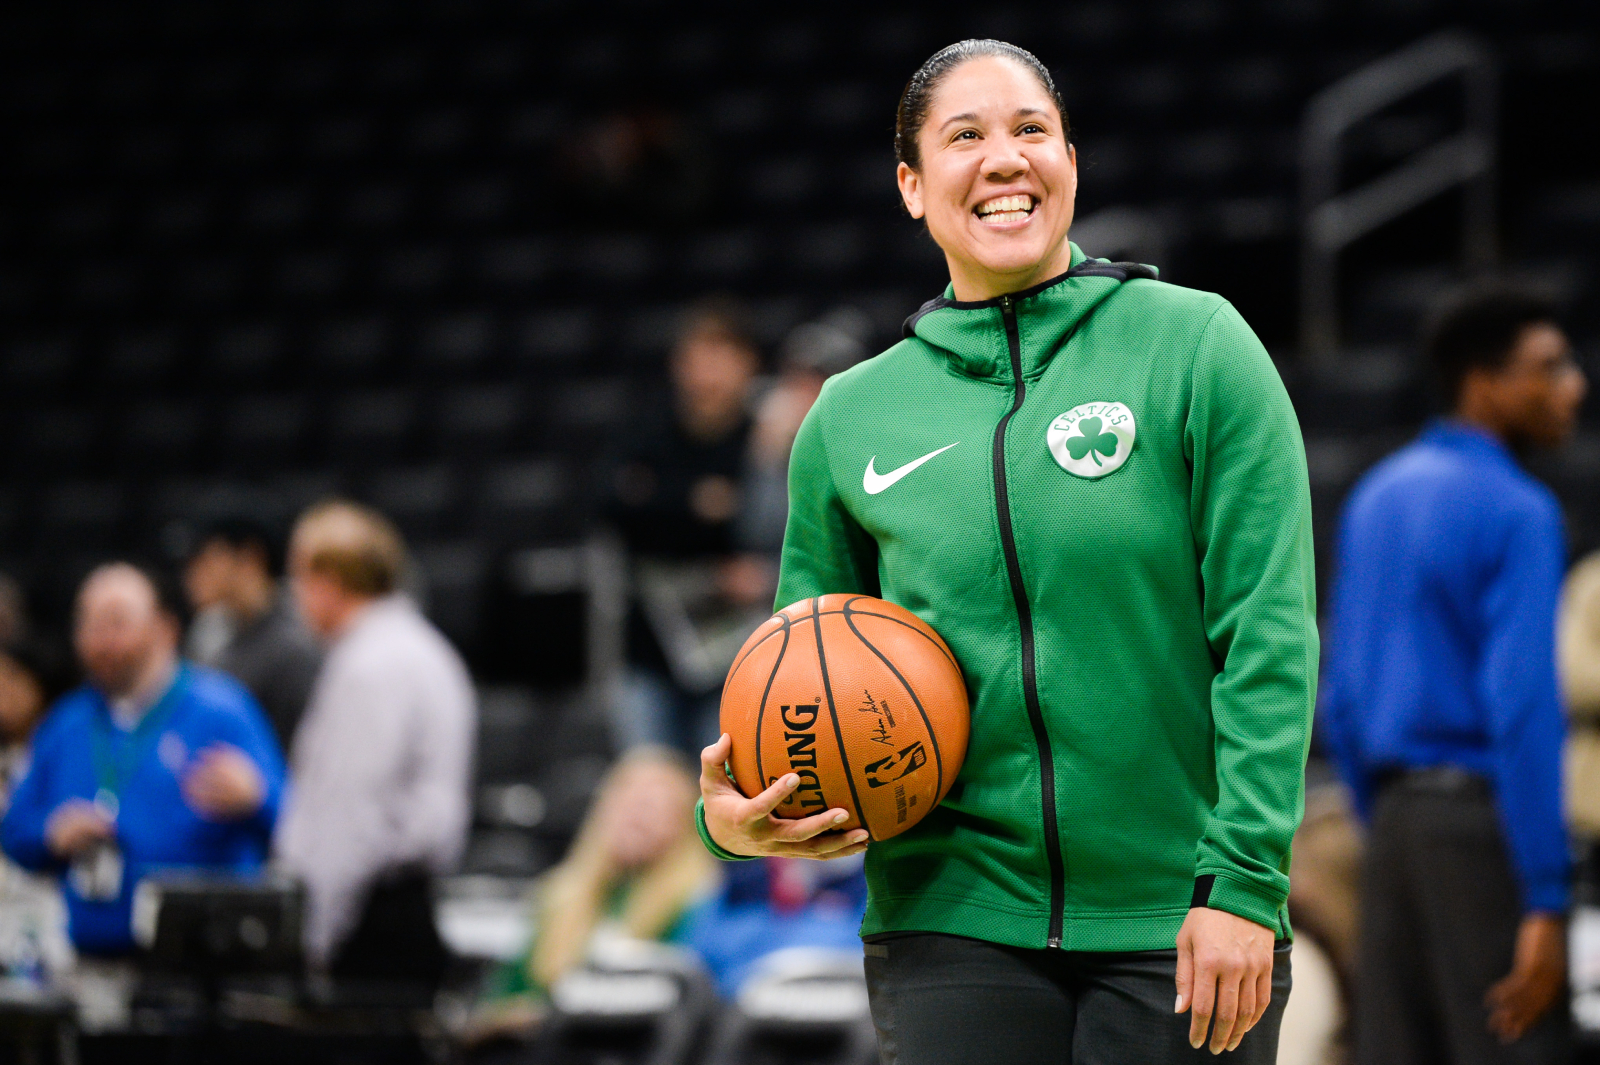 Kara Lawson has been in the news recently after Duke hired her to coach its women's basketball team. Who exactly is she?